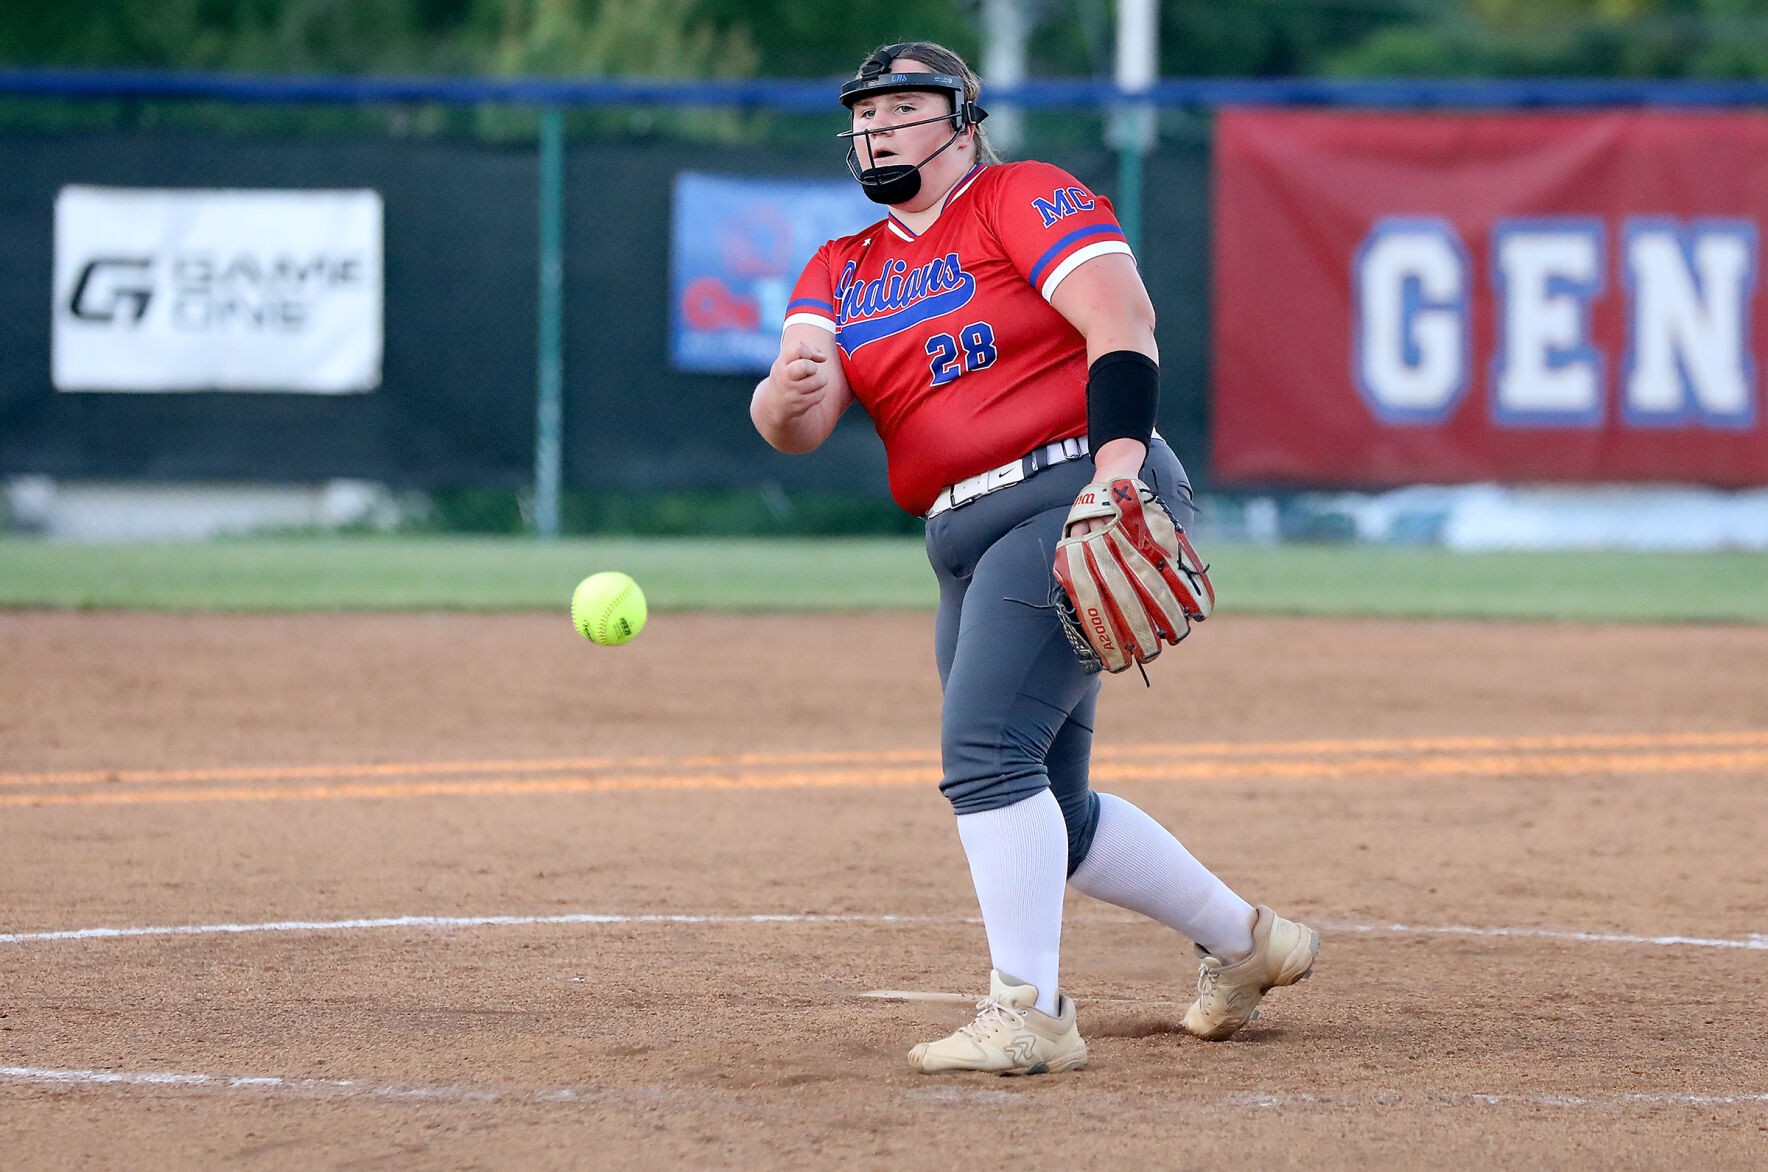 Madison Central Softball Stars Shine: Hack, Gentry, and Coach Hall Recognized